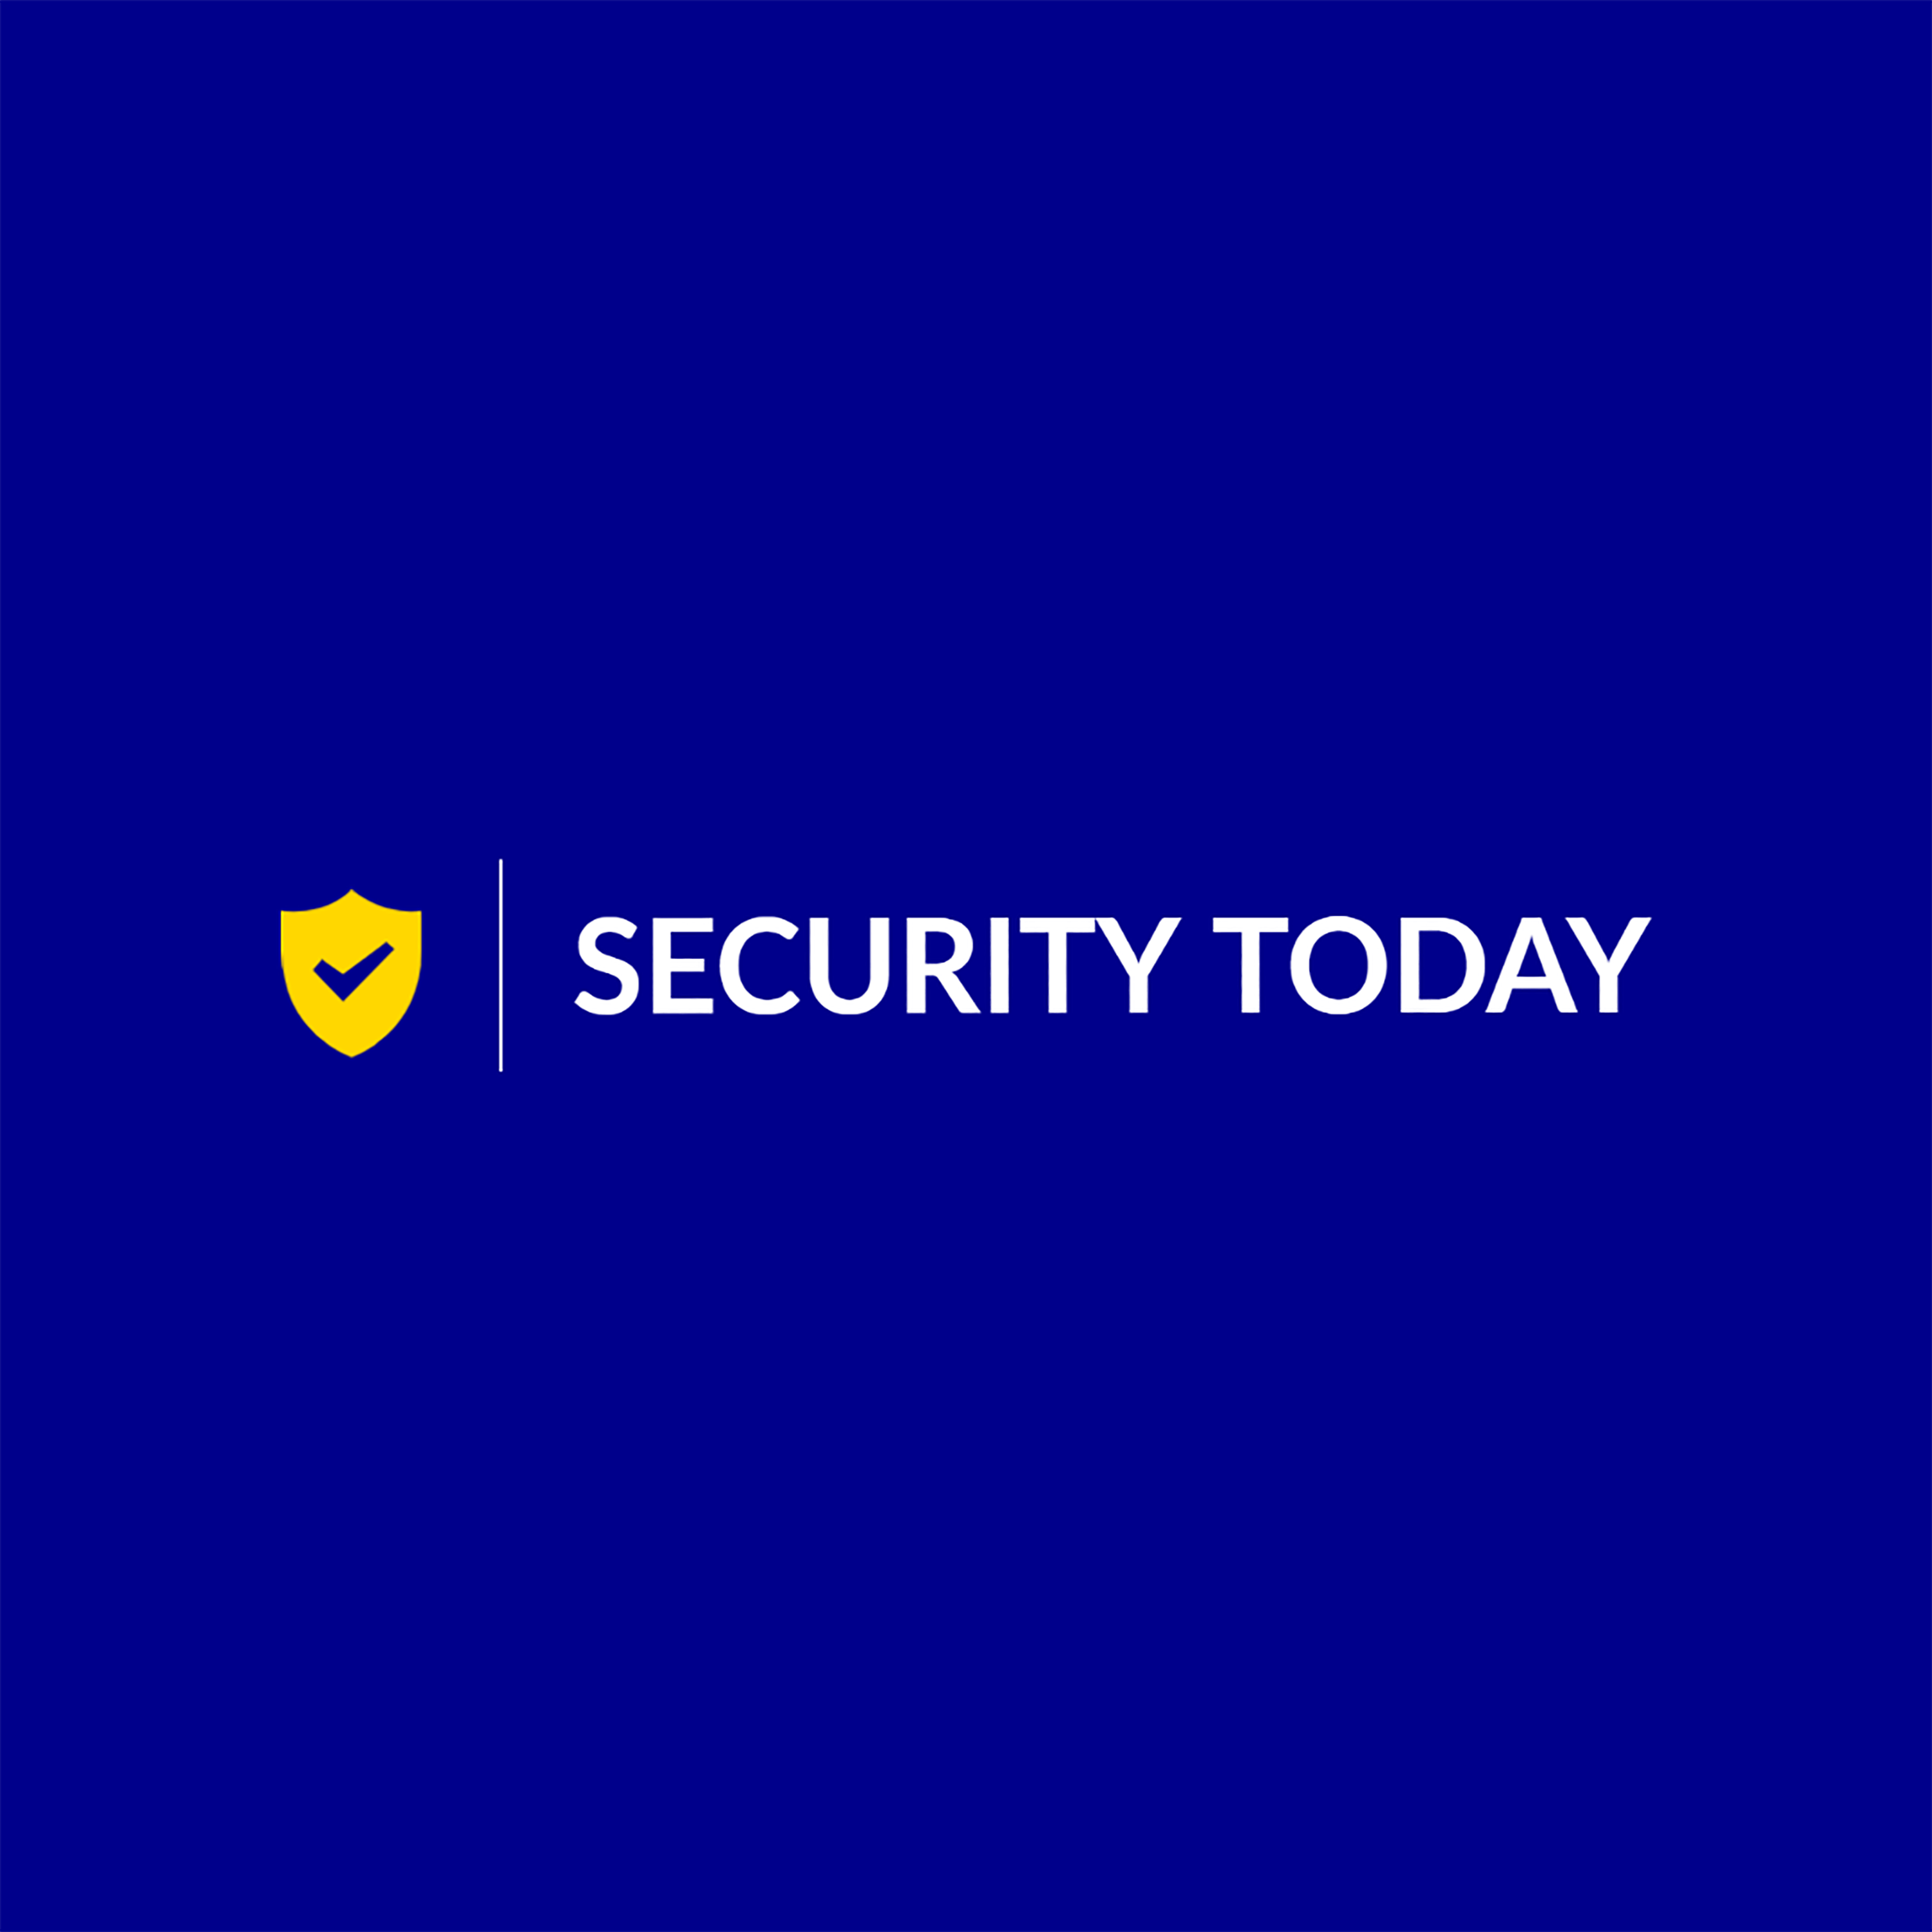 SECURITY TODAY logo